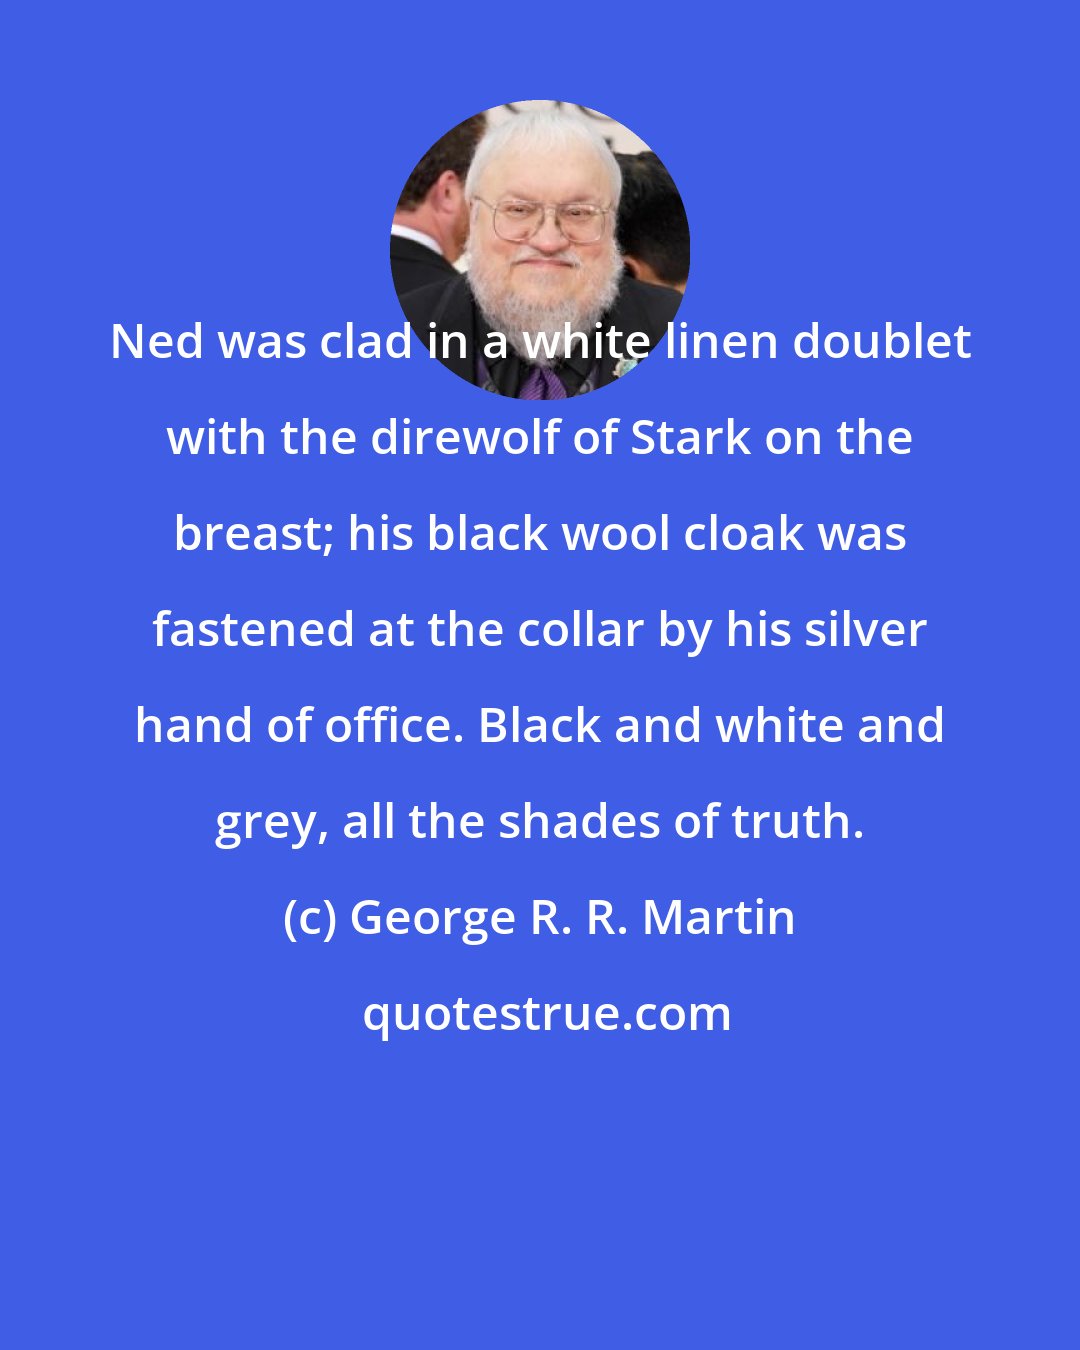 George R. R. Martin: Ned was clad in a white linen doublet with the direwolf of Stark on the breast; his black wool cloak was fastened at the collar by his silver hand of office. Black and white and grey, all the shades of truth.